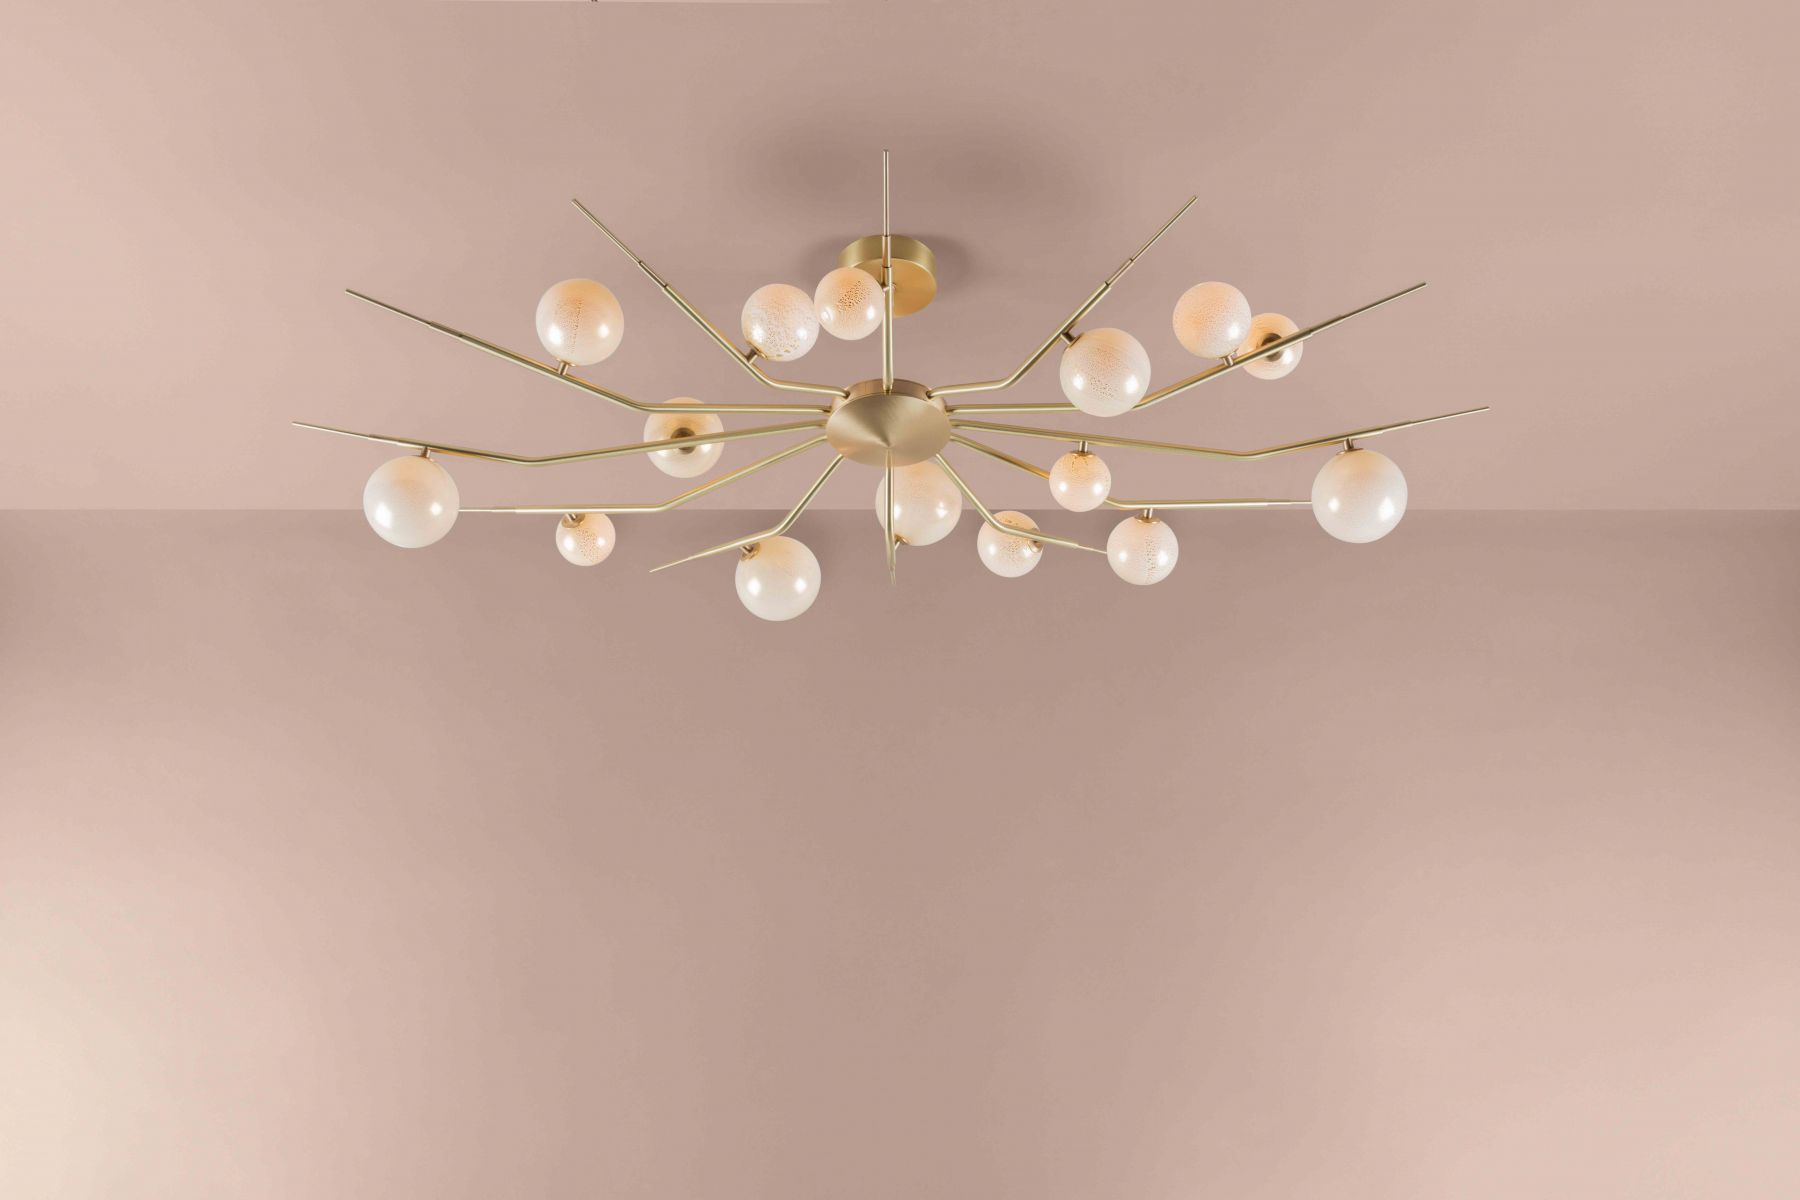  Ceiling lamp Cherry Bomb Radial collection  Lindsey Adelman pic-1